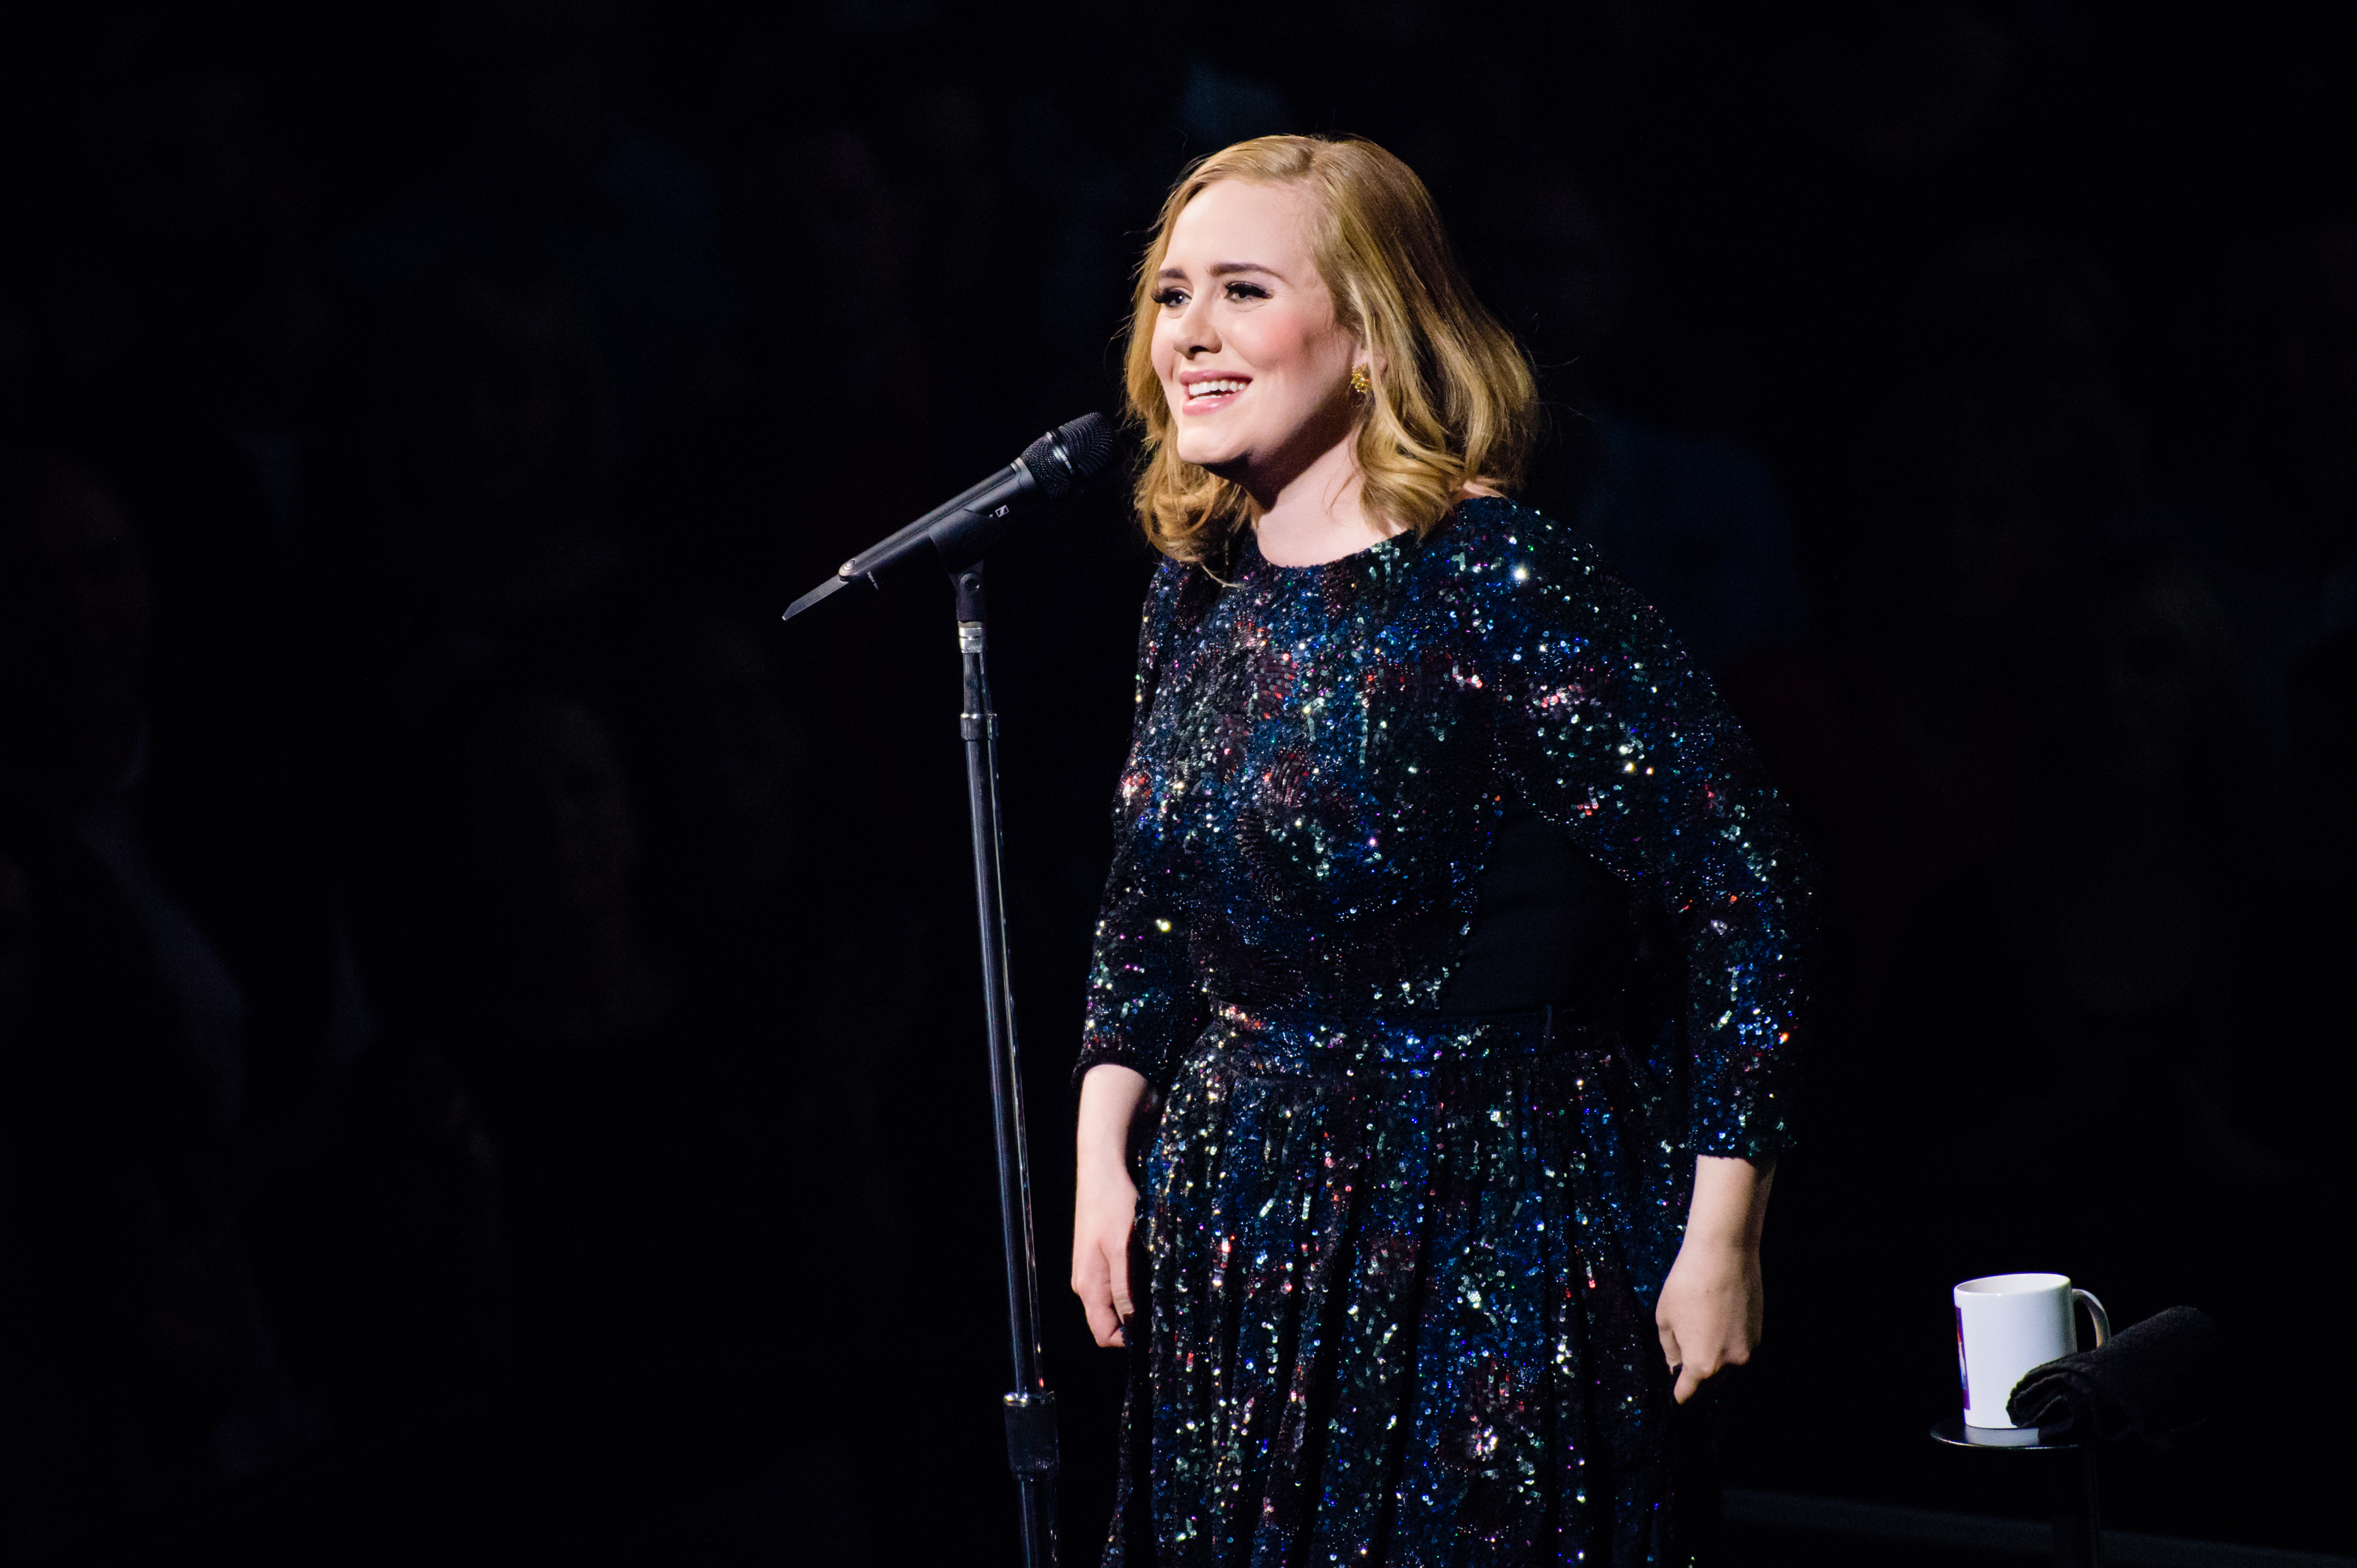 Adele Performs At The Mercedes Benz Arena, Berlin